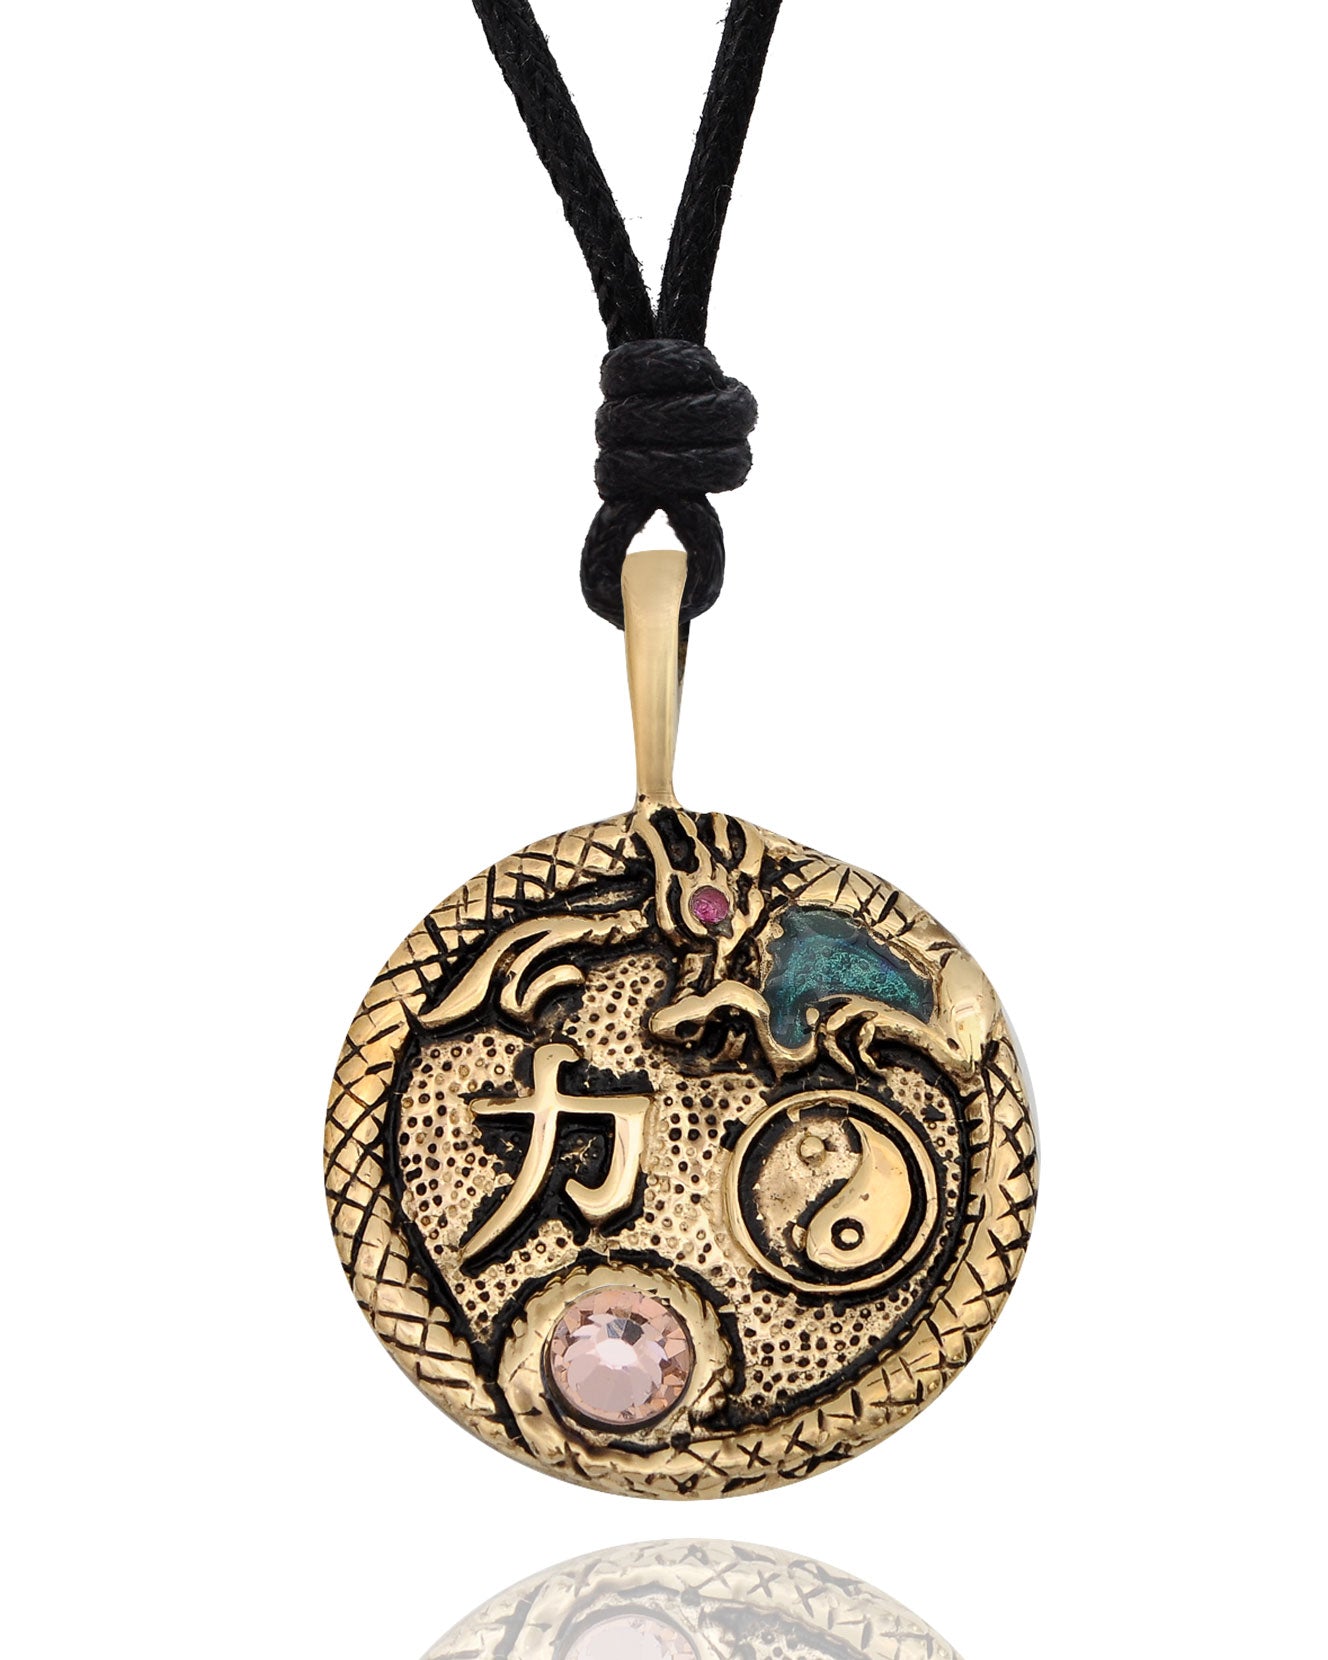 Crystal Dragon Yin Yang Silver Pewter Gold Brass Pewter Necklace Pendant Jewelry